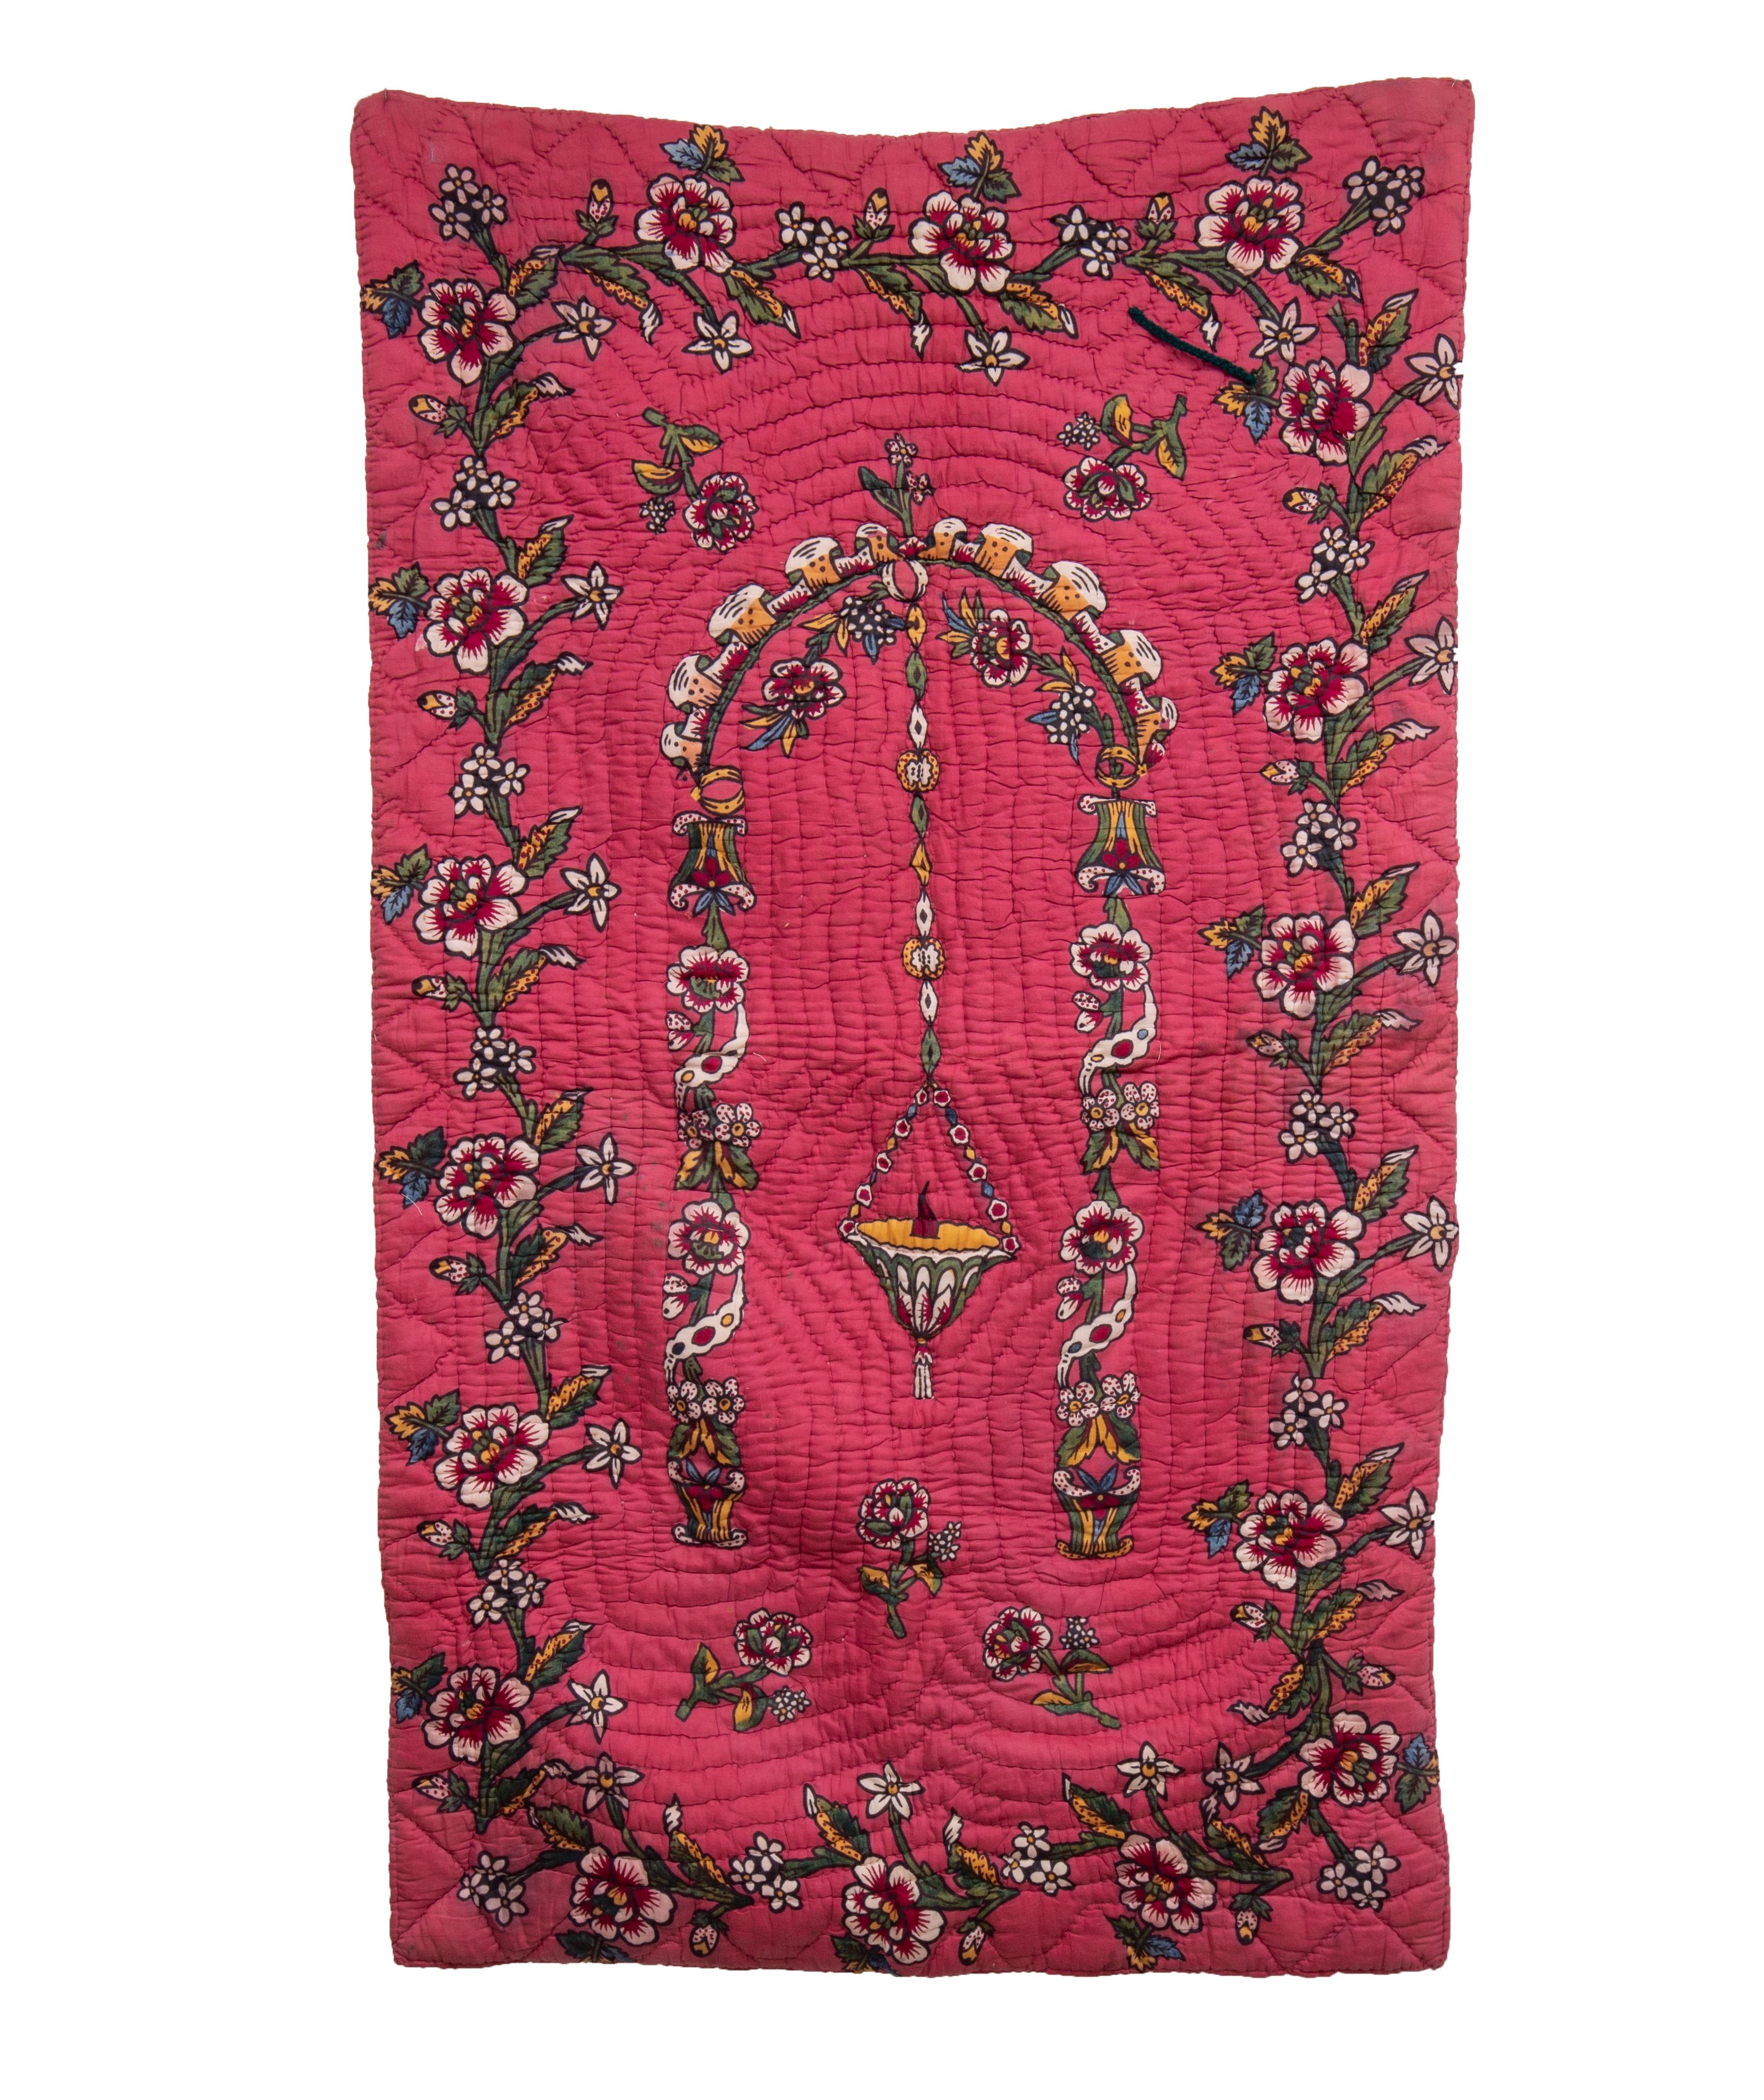 Hand block printing is one of the land marks of Western Anatolian material culture. These quilts have been used either as prayer mats of wall hangings.